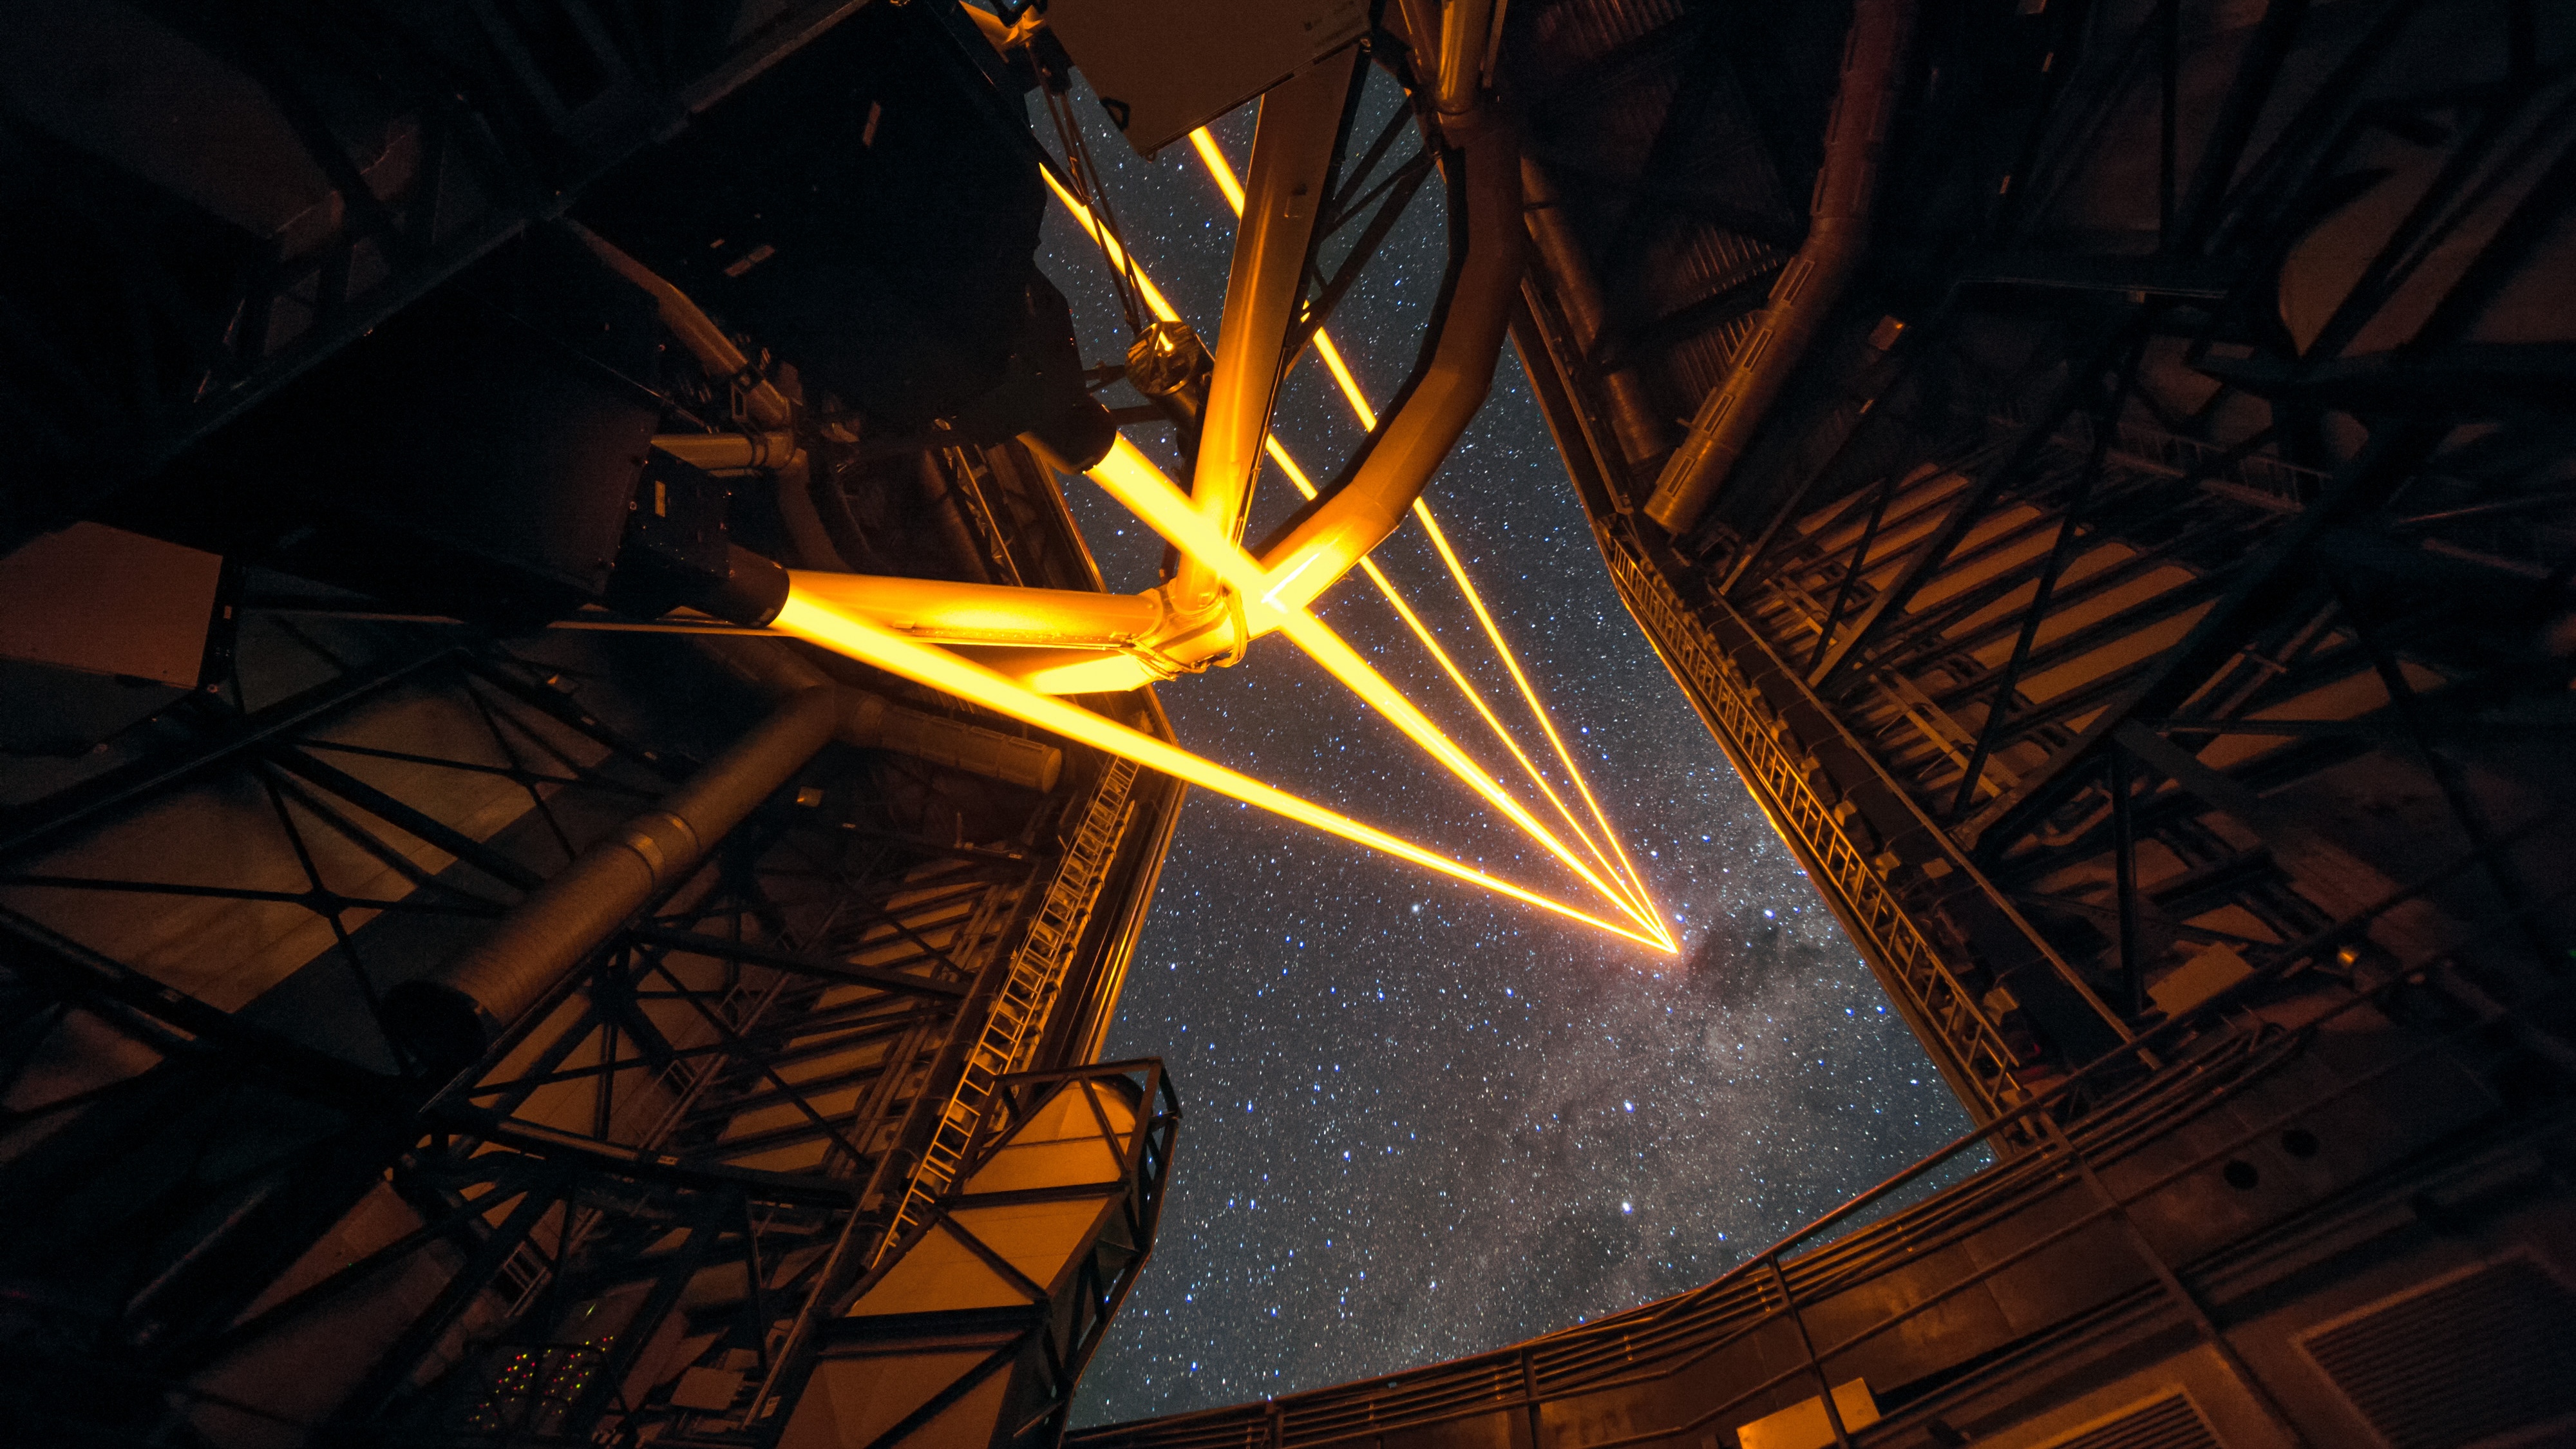 A telescope dedicated to astronomy pointing towards a starry sky at night, with beams of light overcoming the atmosphere to create a visual path.